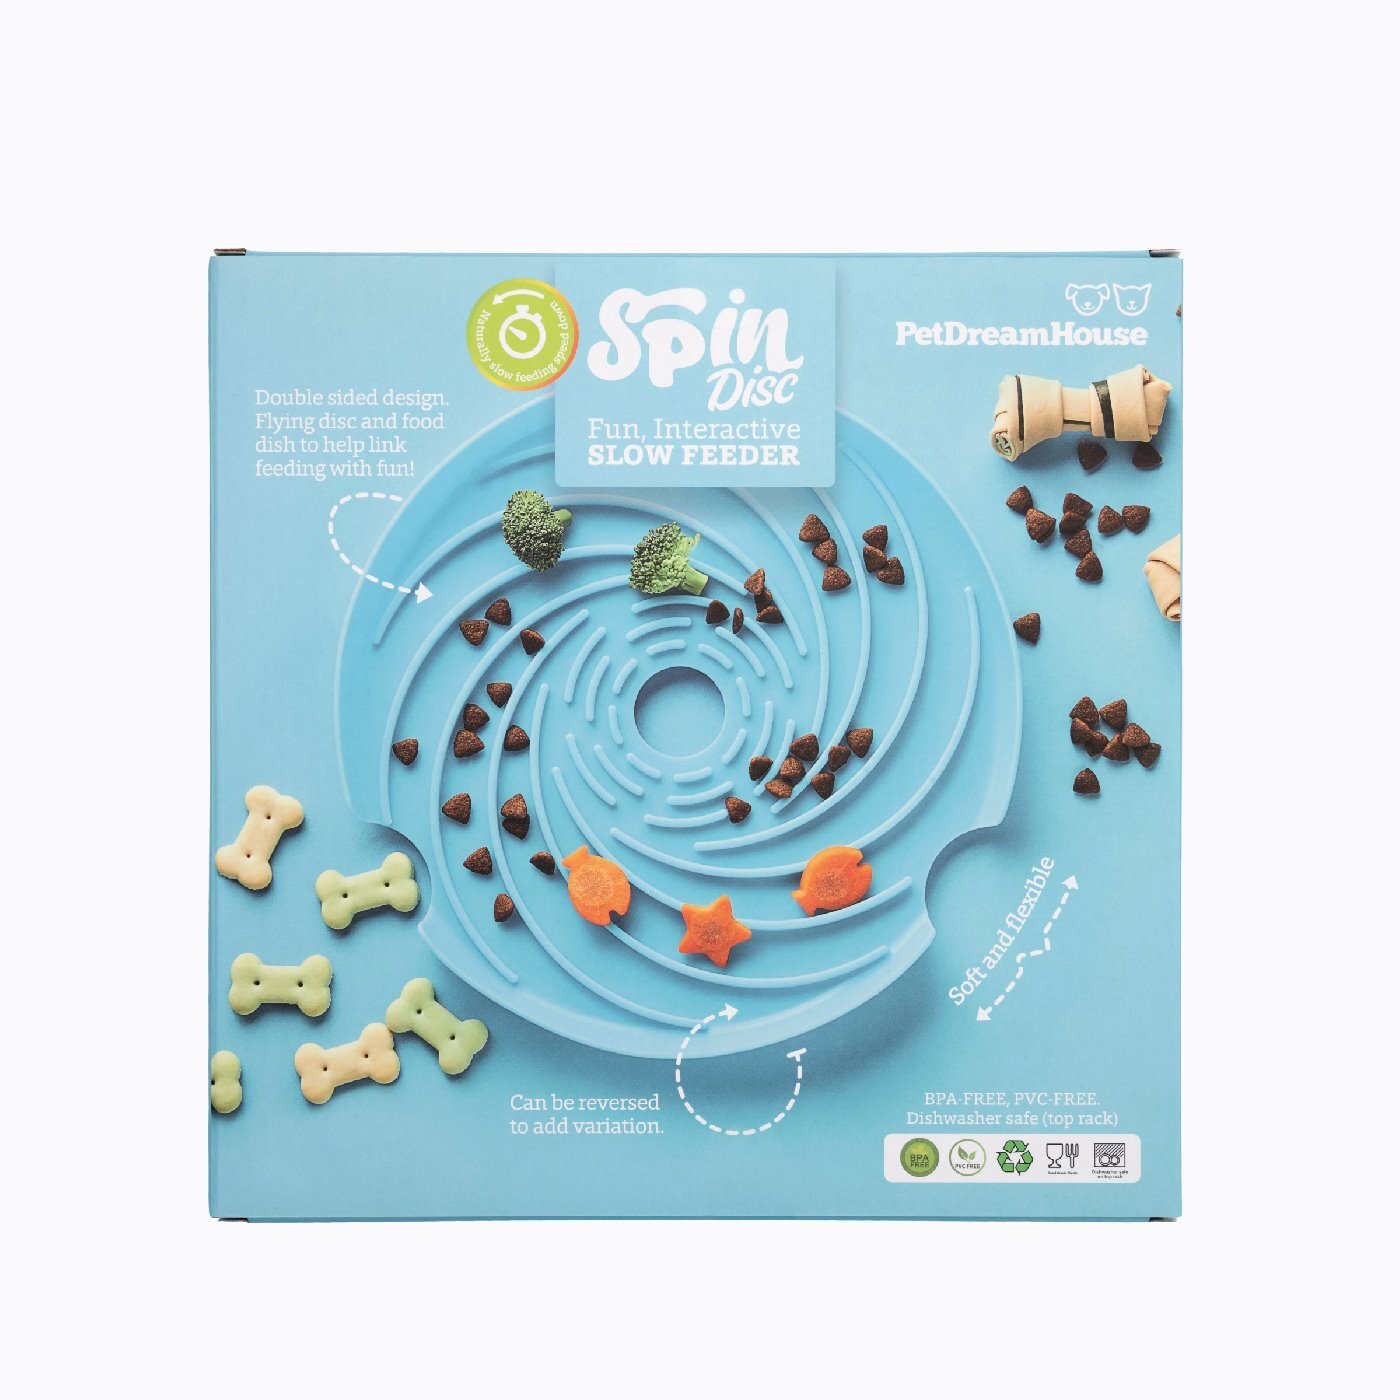 SPIN Interactive 2-in-1 Slow Feeder Lick Pad & Frisbee for Dogs image 6